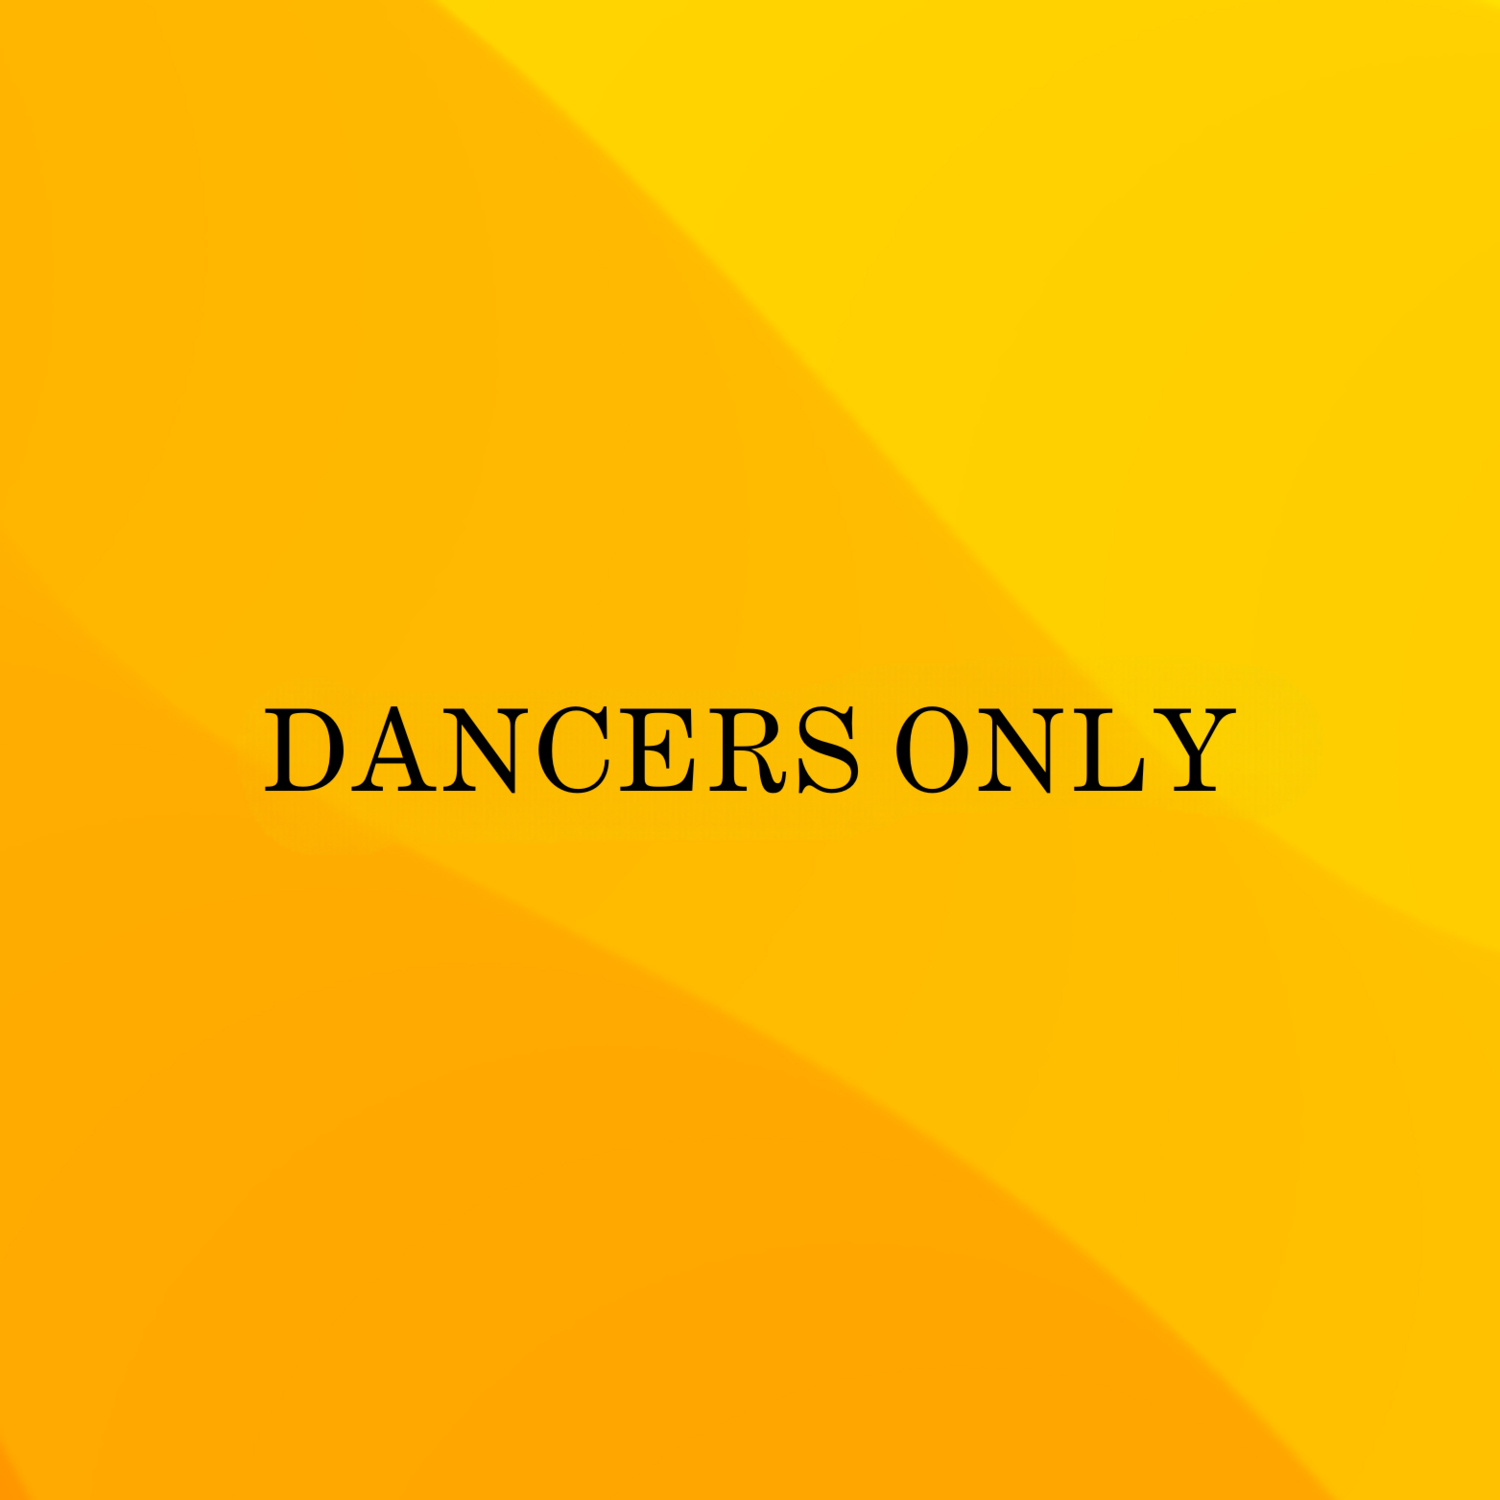 DANCERS ONLY